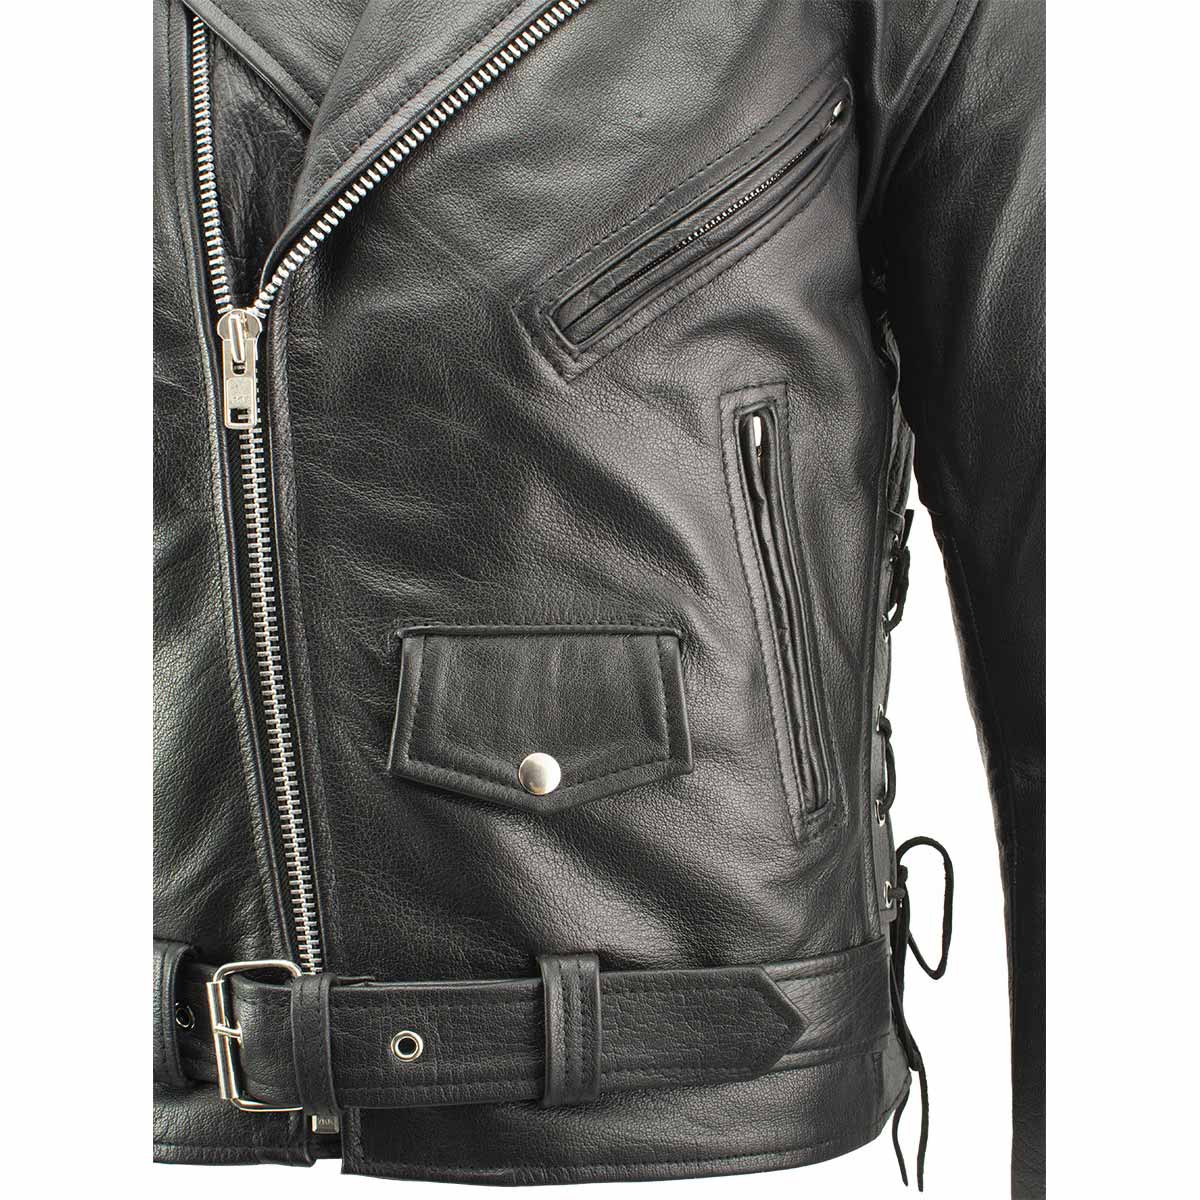 Xelement B7103 Men's 'Ruffian' Classic Black Motorcycle Side Lace Leather Jacket with X-Armor Protection